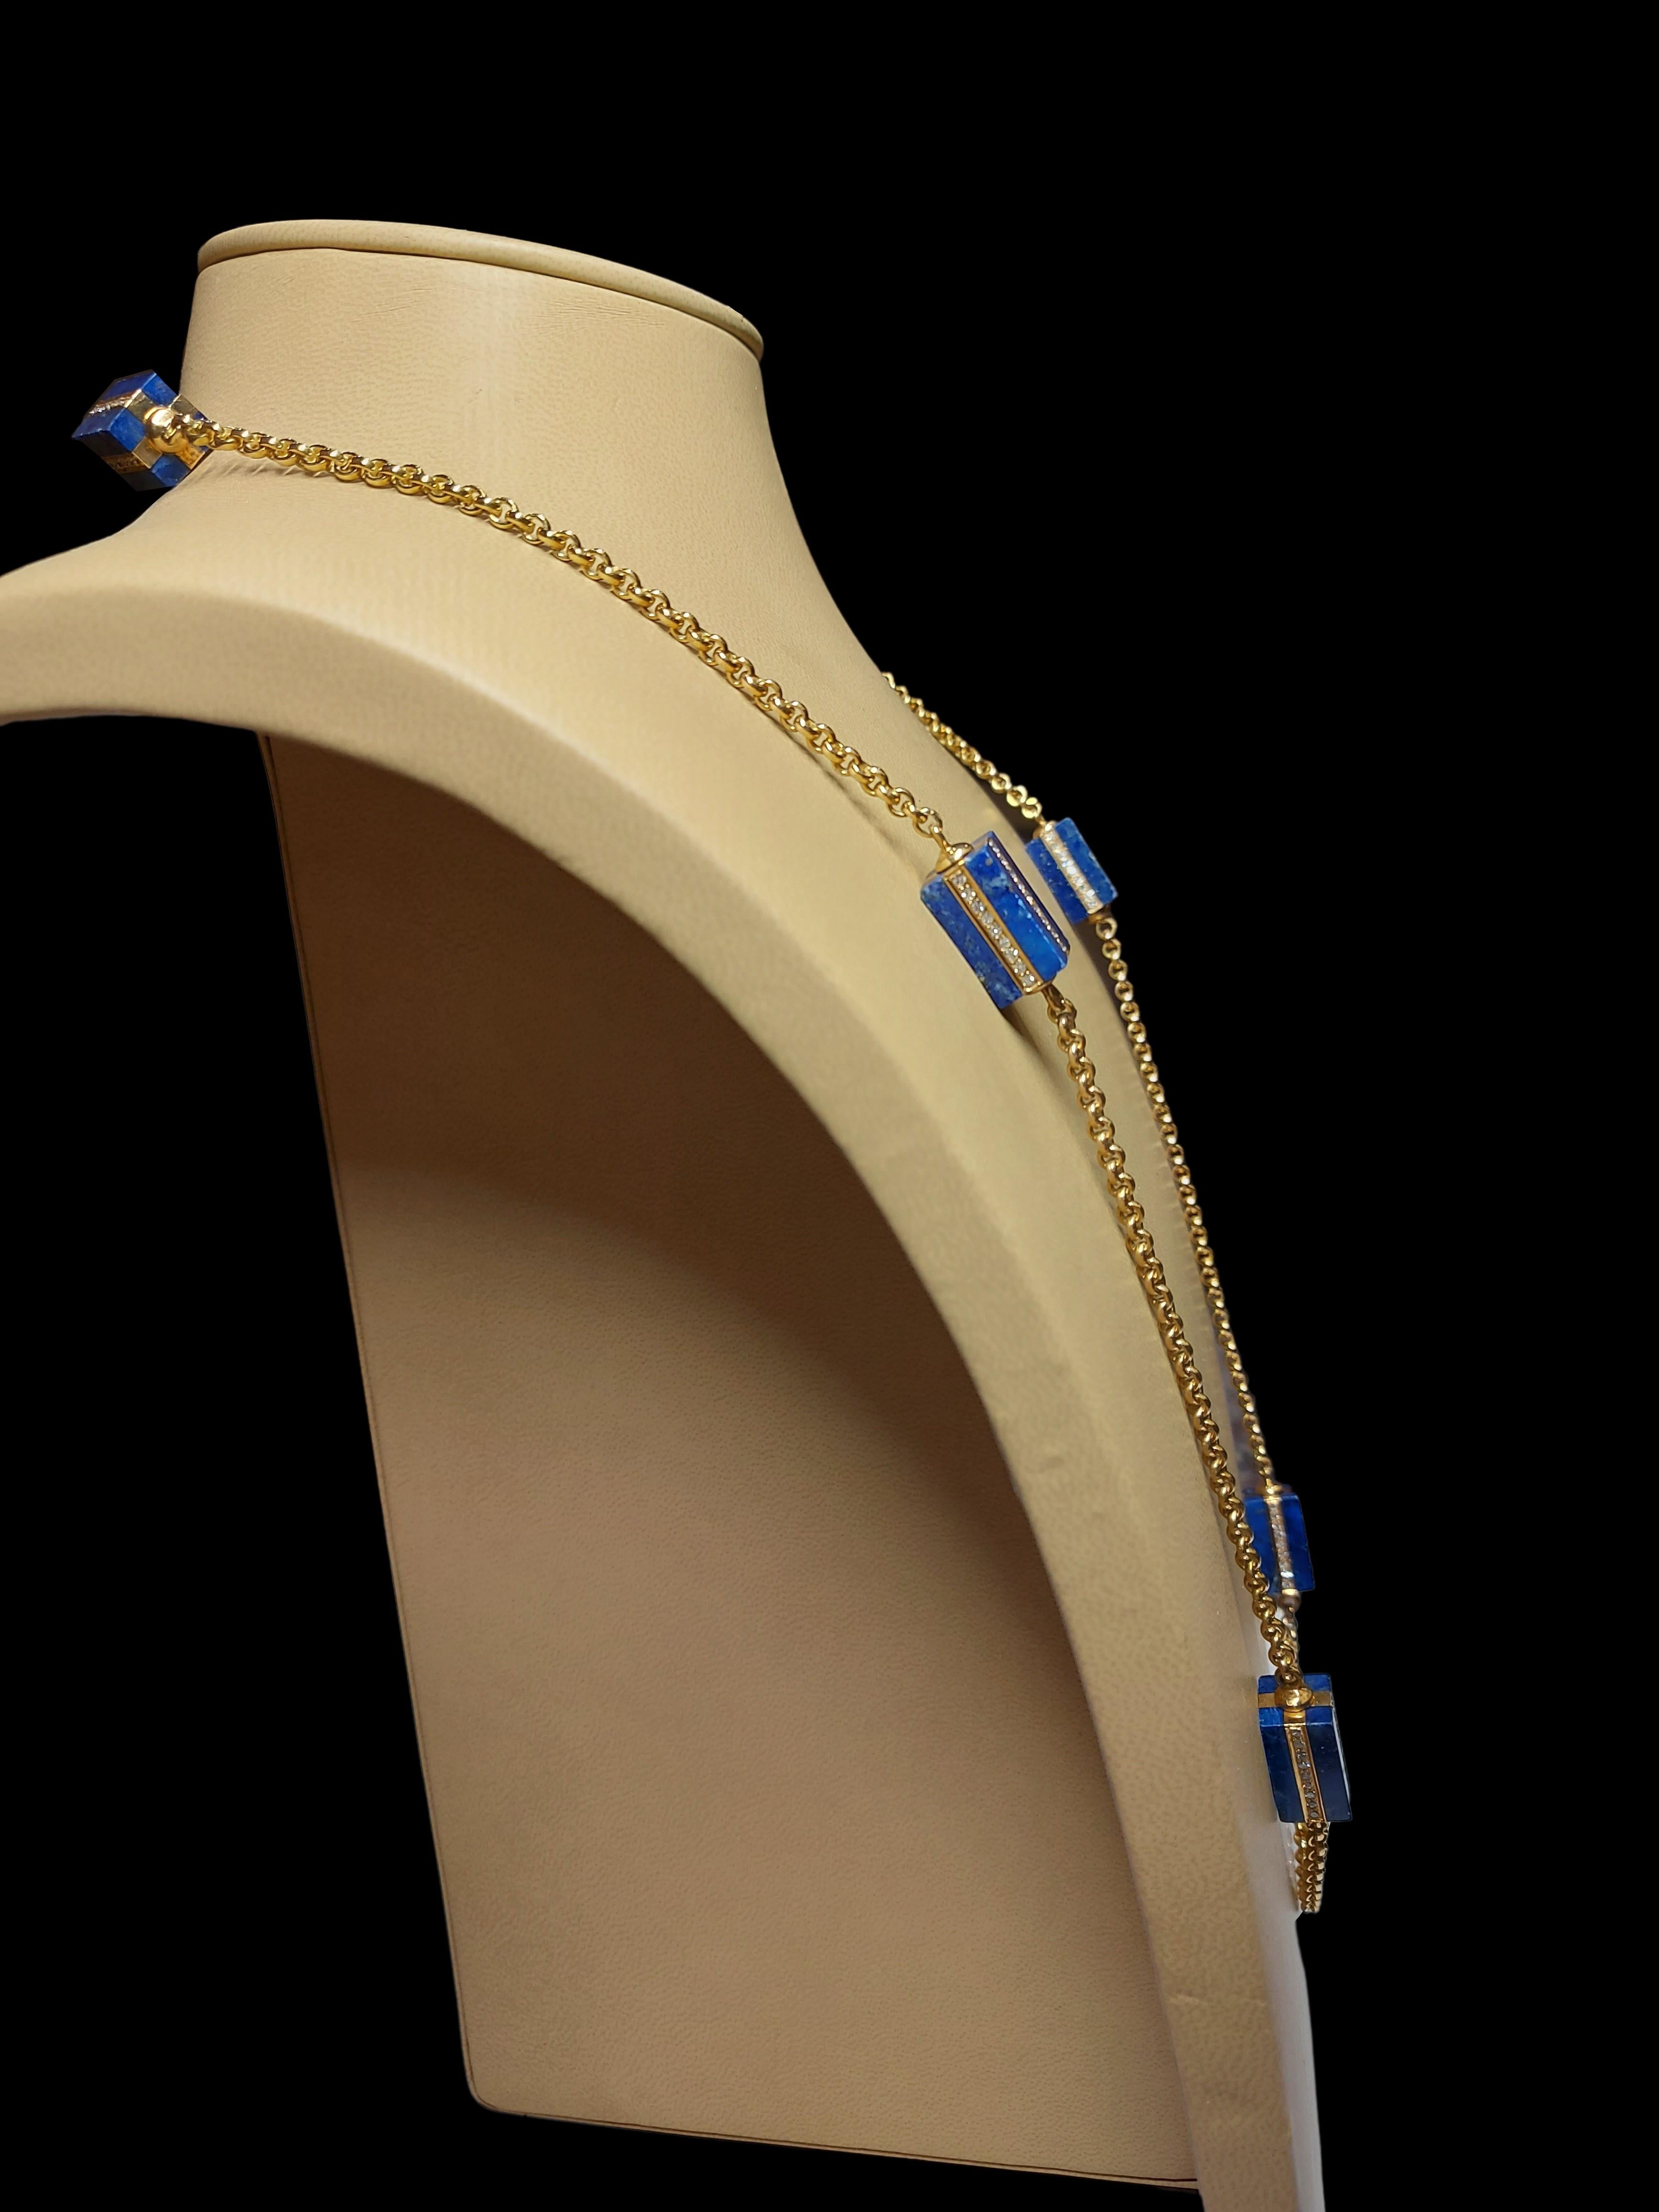 Long Necklace with Lapis Lazuli and 4.32 Ct Diamonds, Estate Sultan Oman Qaboos For Sale 2